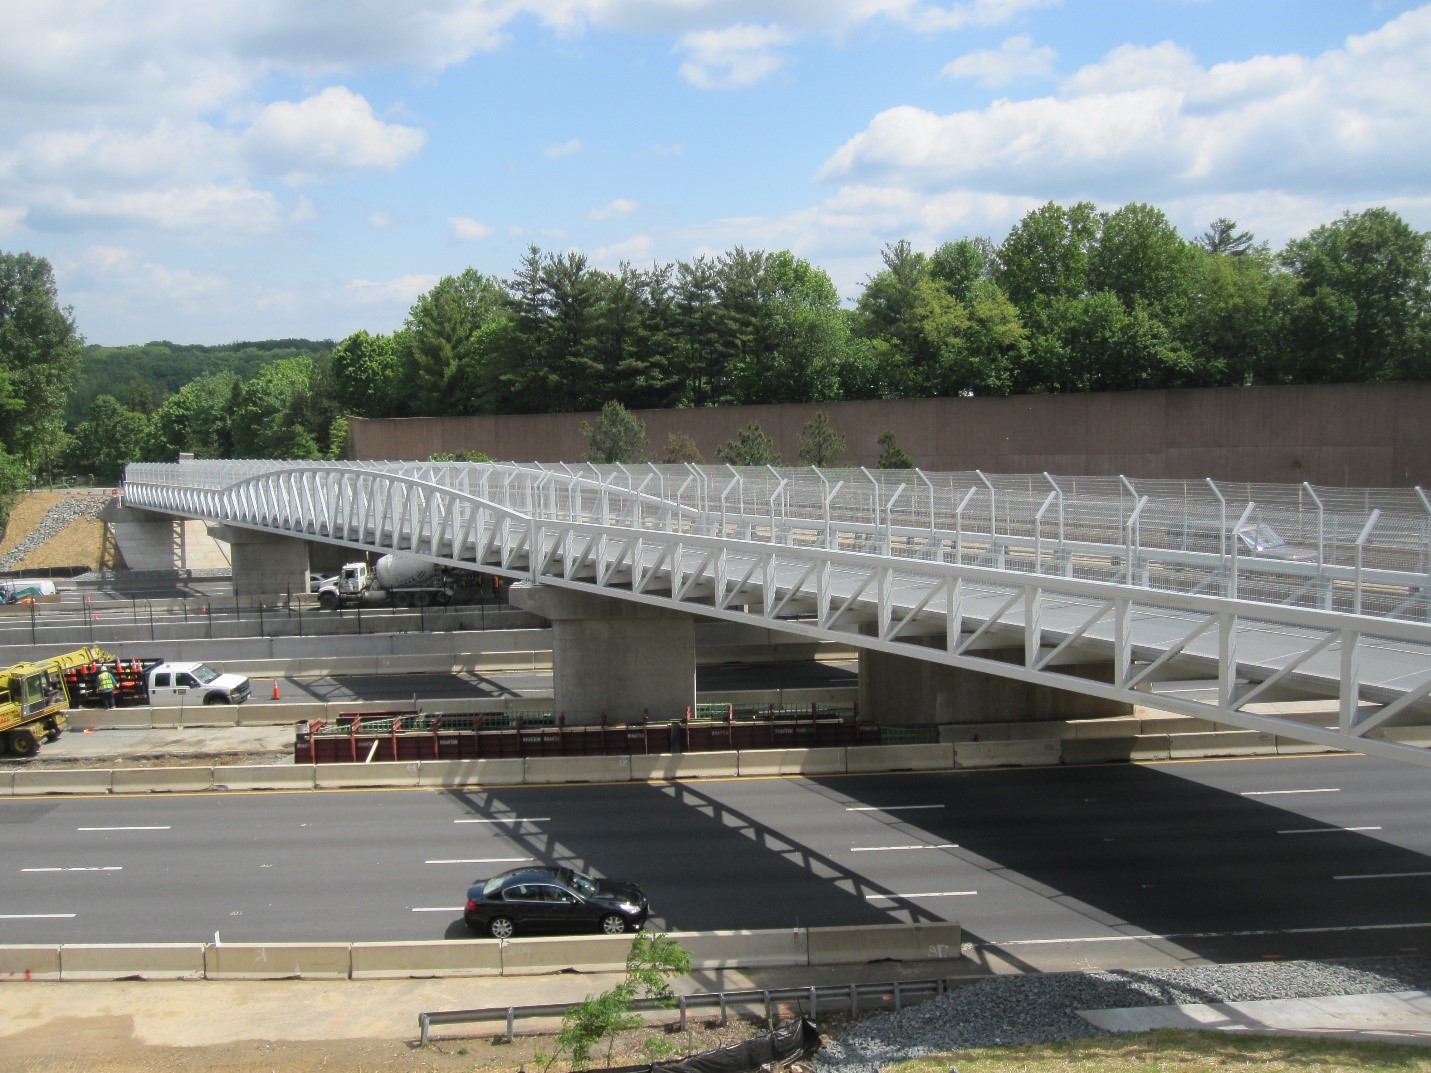 Image 6: This picture depicts FRP deck panels used on a pedestrian bridge.